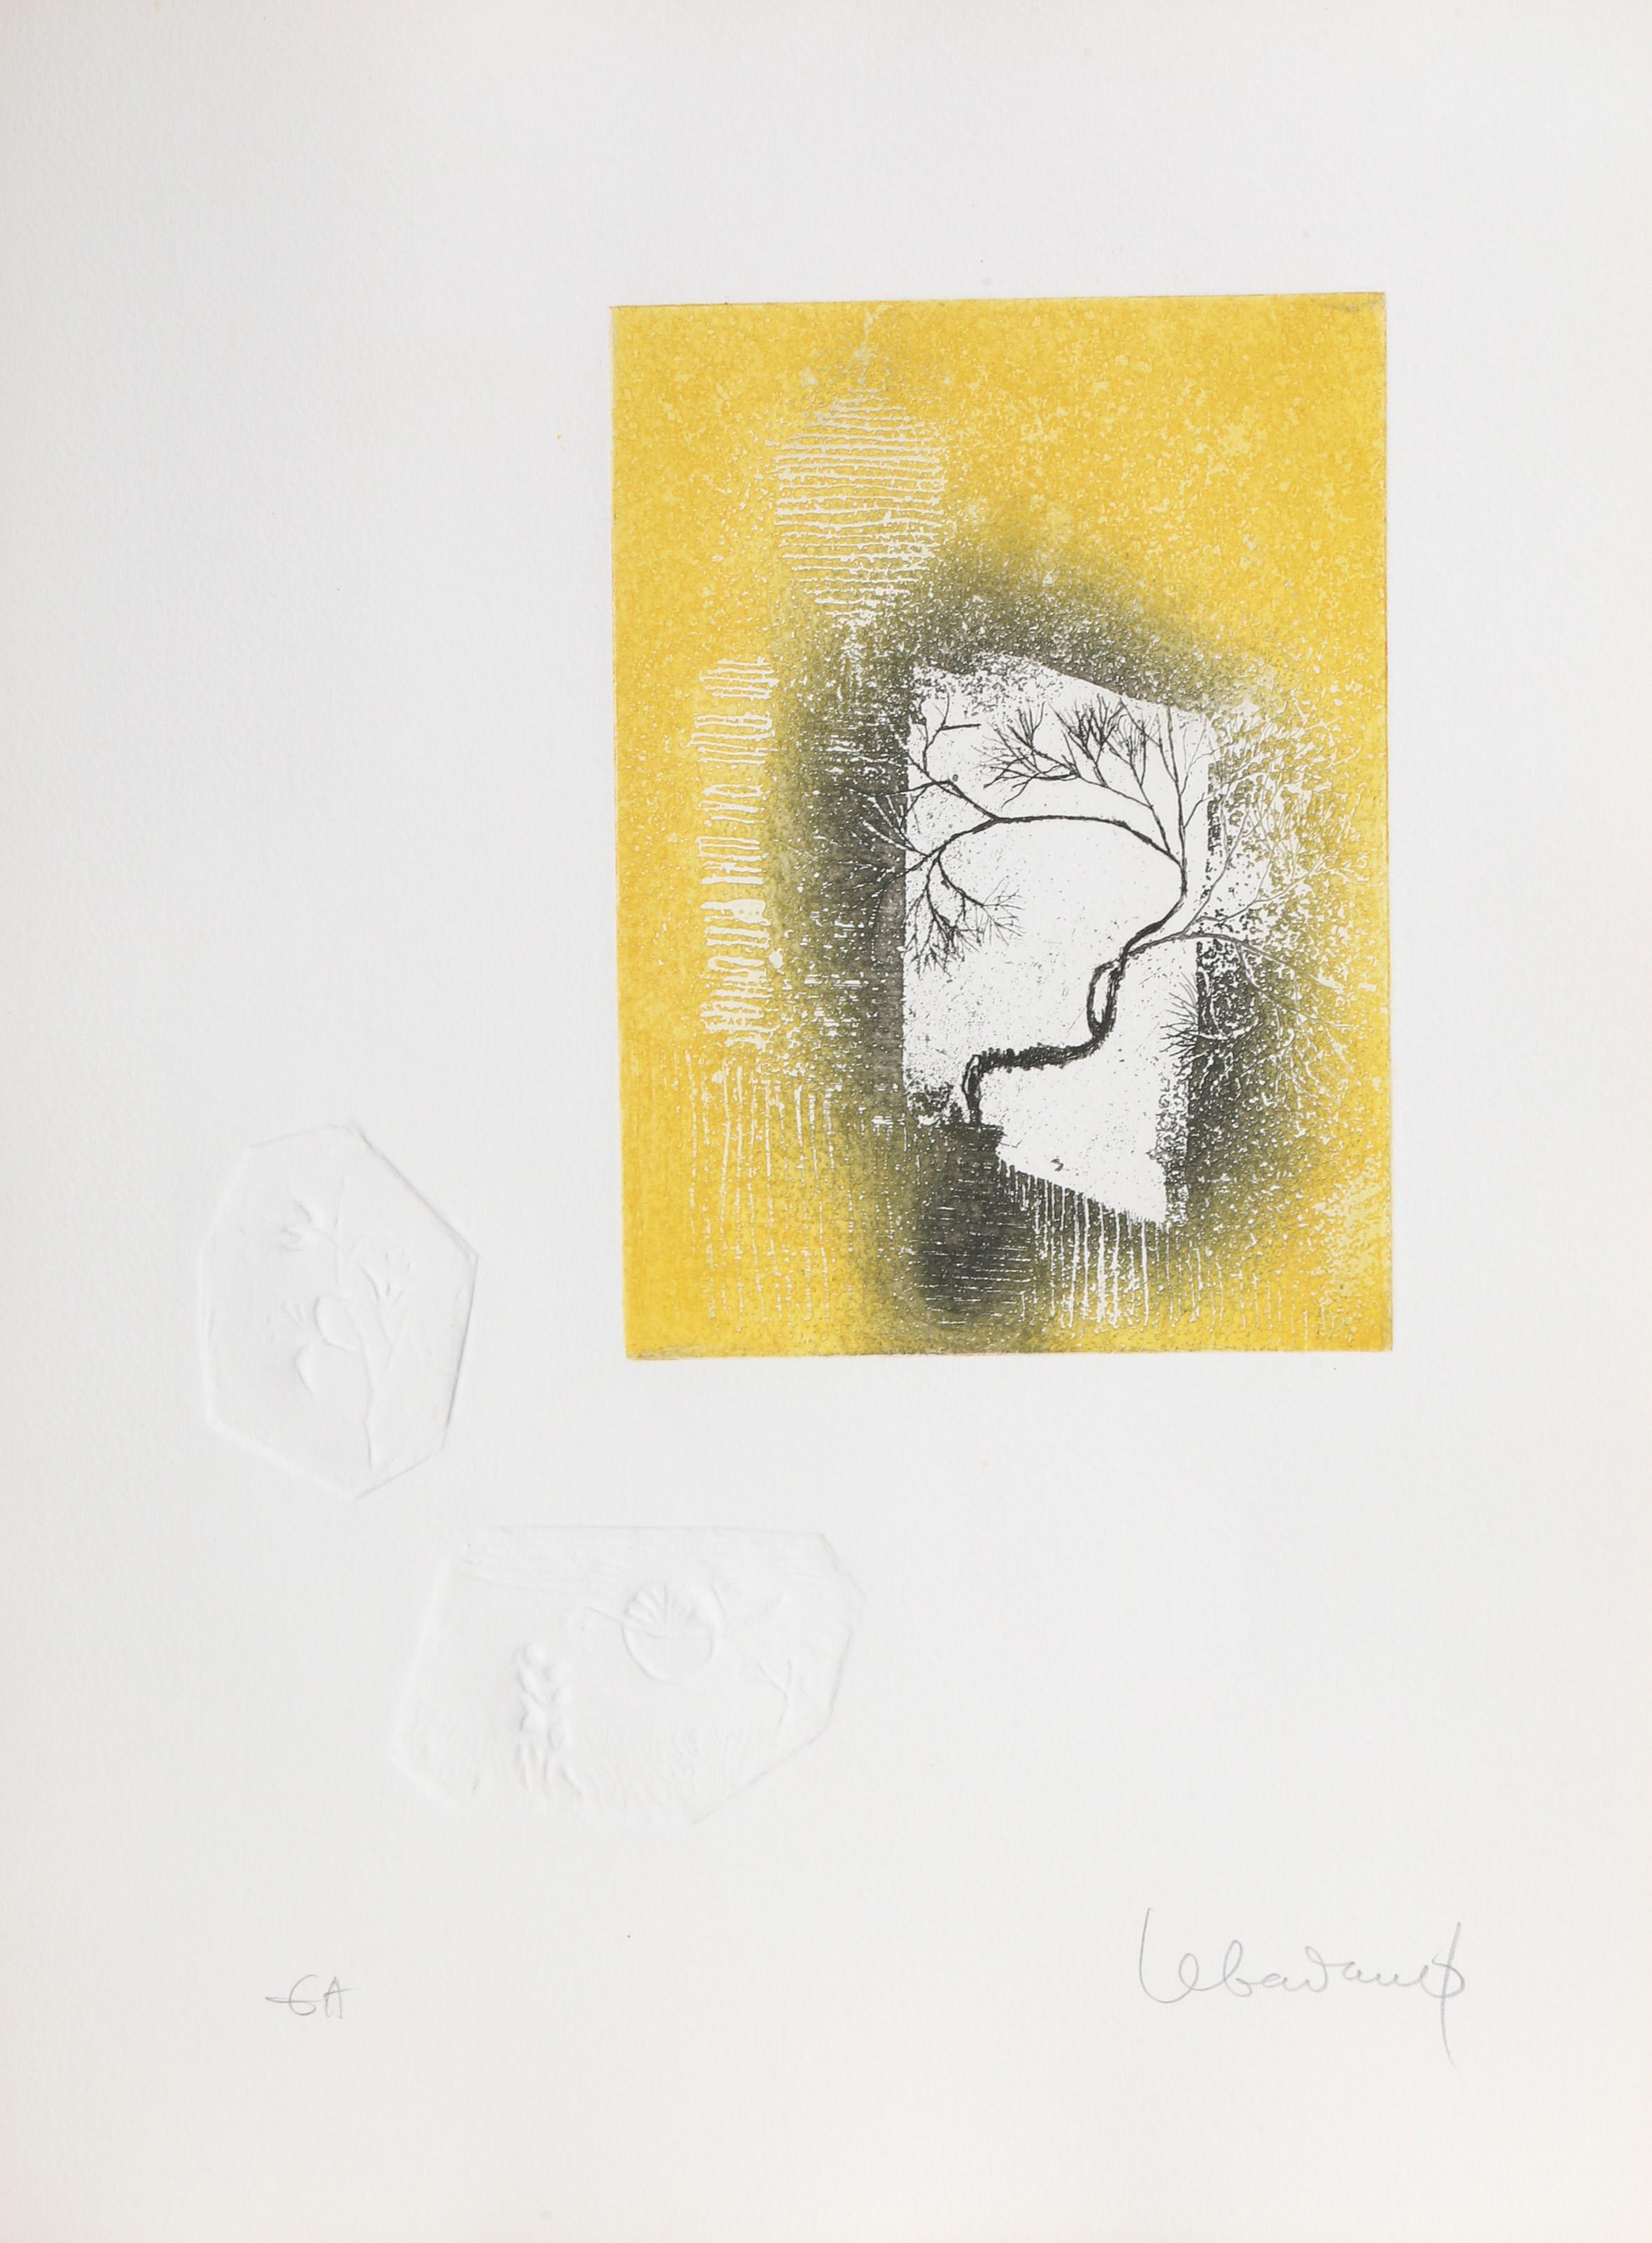 Lebadang (aka Hoi) -  Yellow Tree. Year: circa 1970, Medium: Etching with Relief, signed in pencil, Edition: EA, Size: 15  x 11 in. (38.1  x 27.94 cm) 